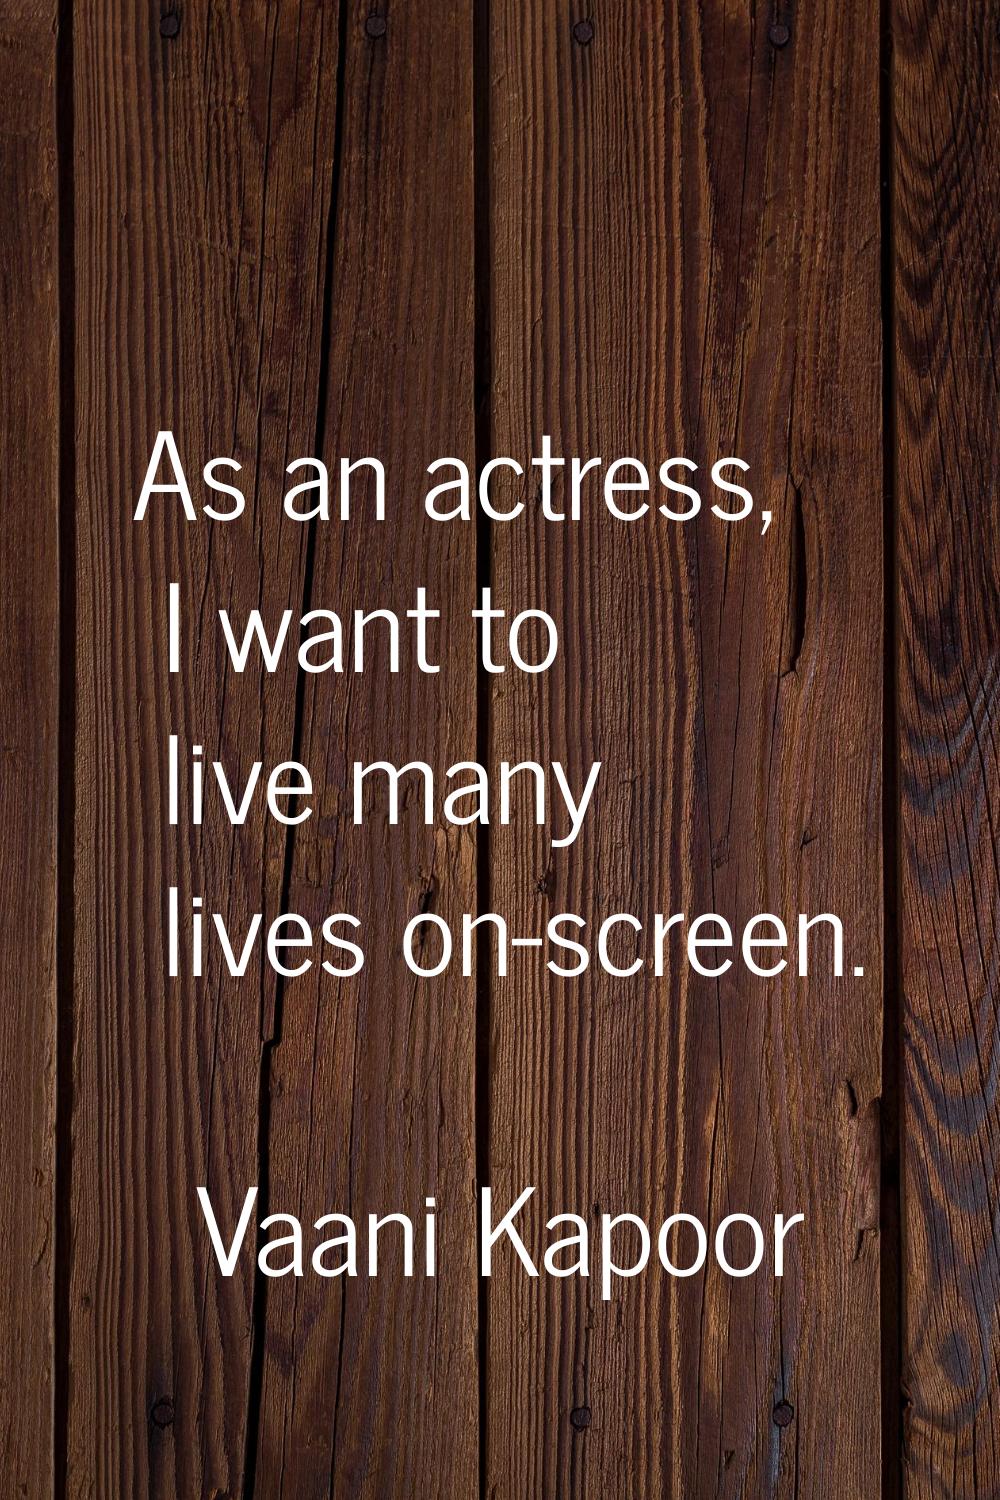 As an actress, I want to live many lives on-screen.